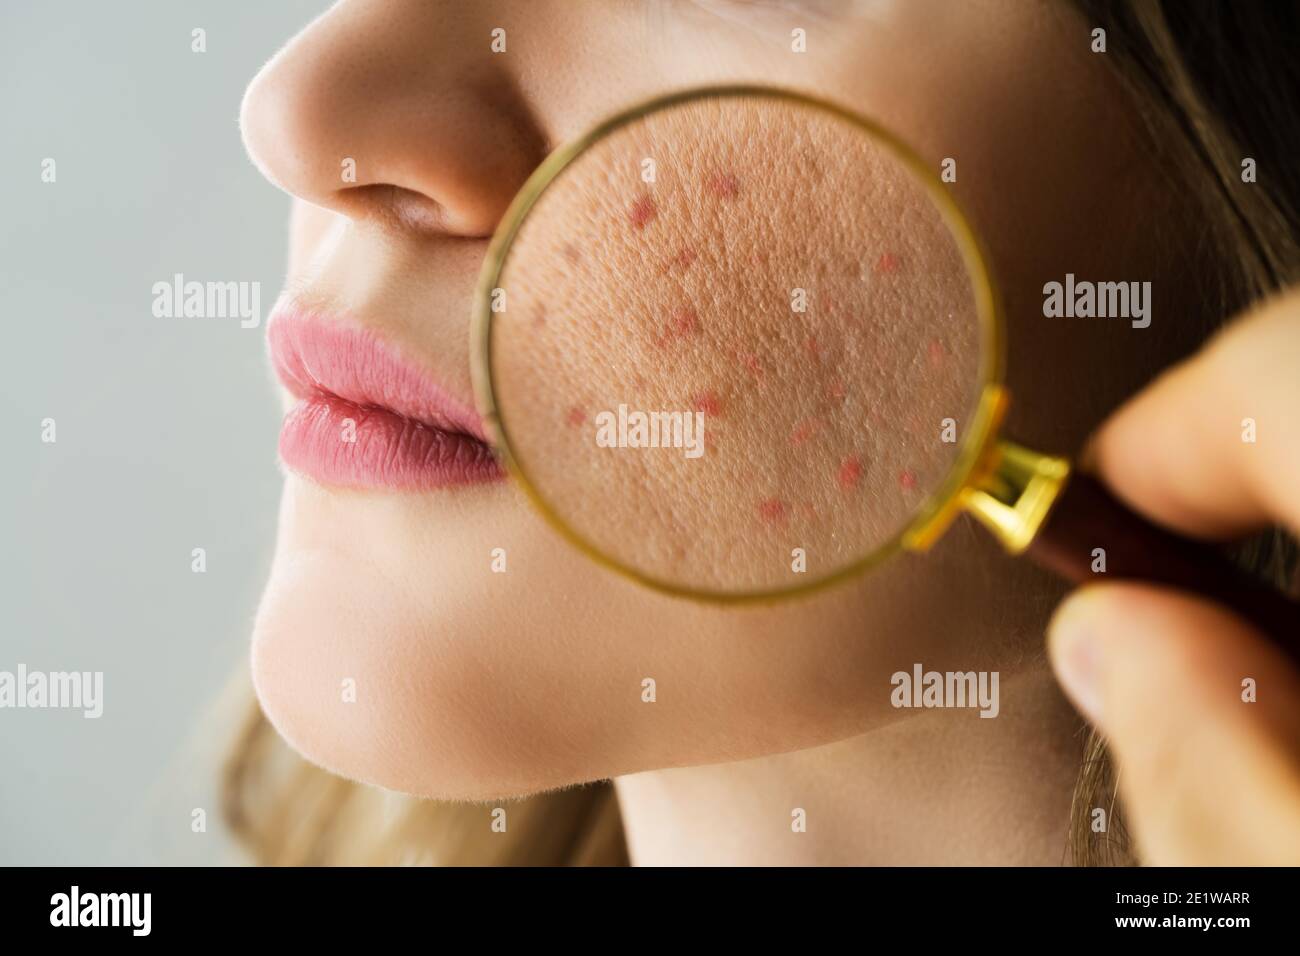 Examining Skin Acne Problems With Magnifying Glass Stock Photo